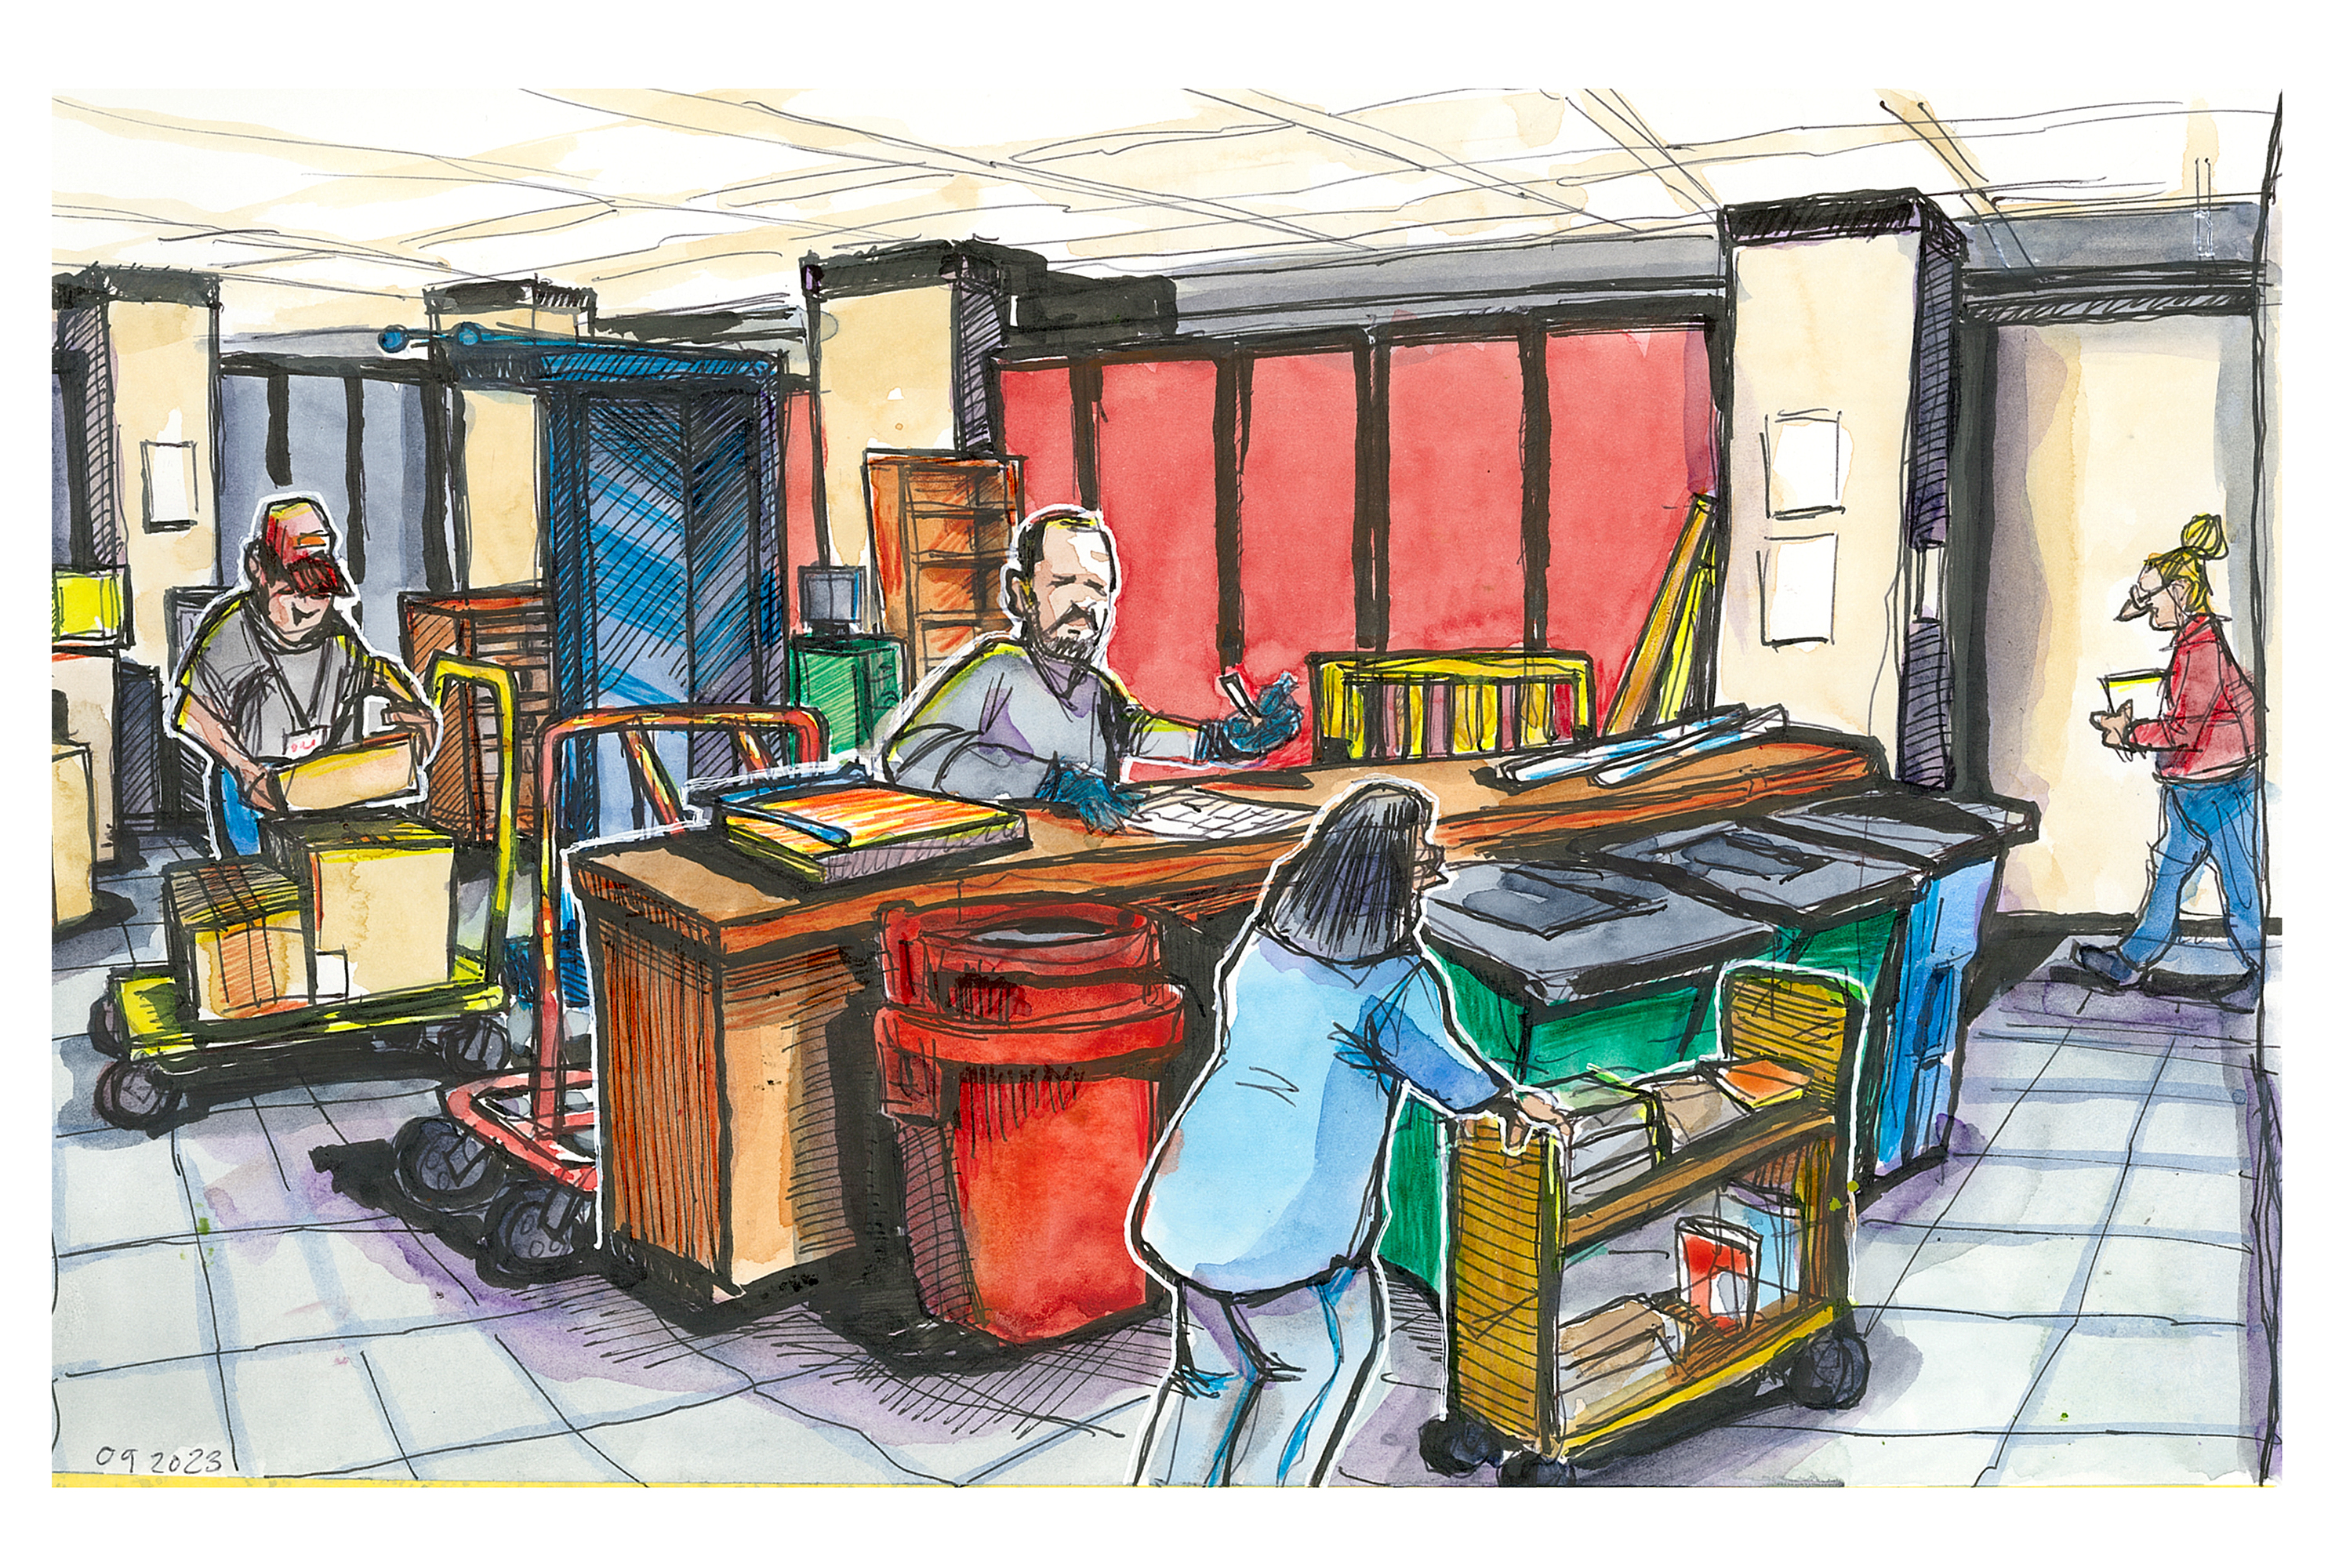 Ink and watercolor sketch of the surplus area inside Newman Library